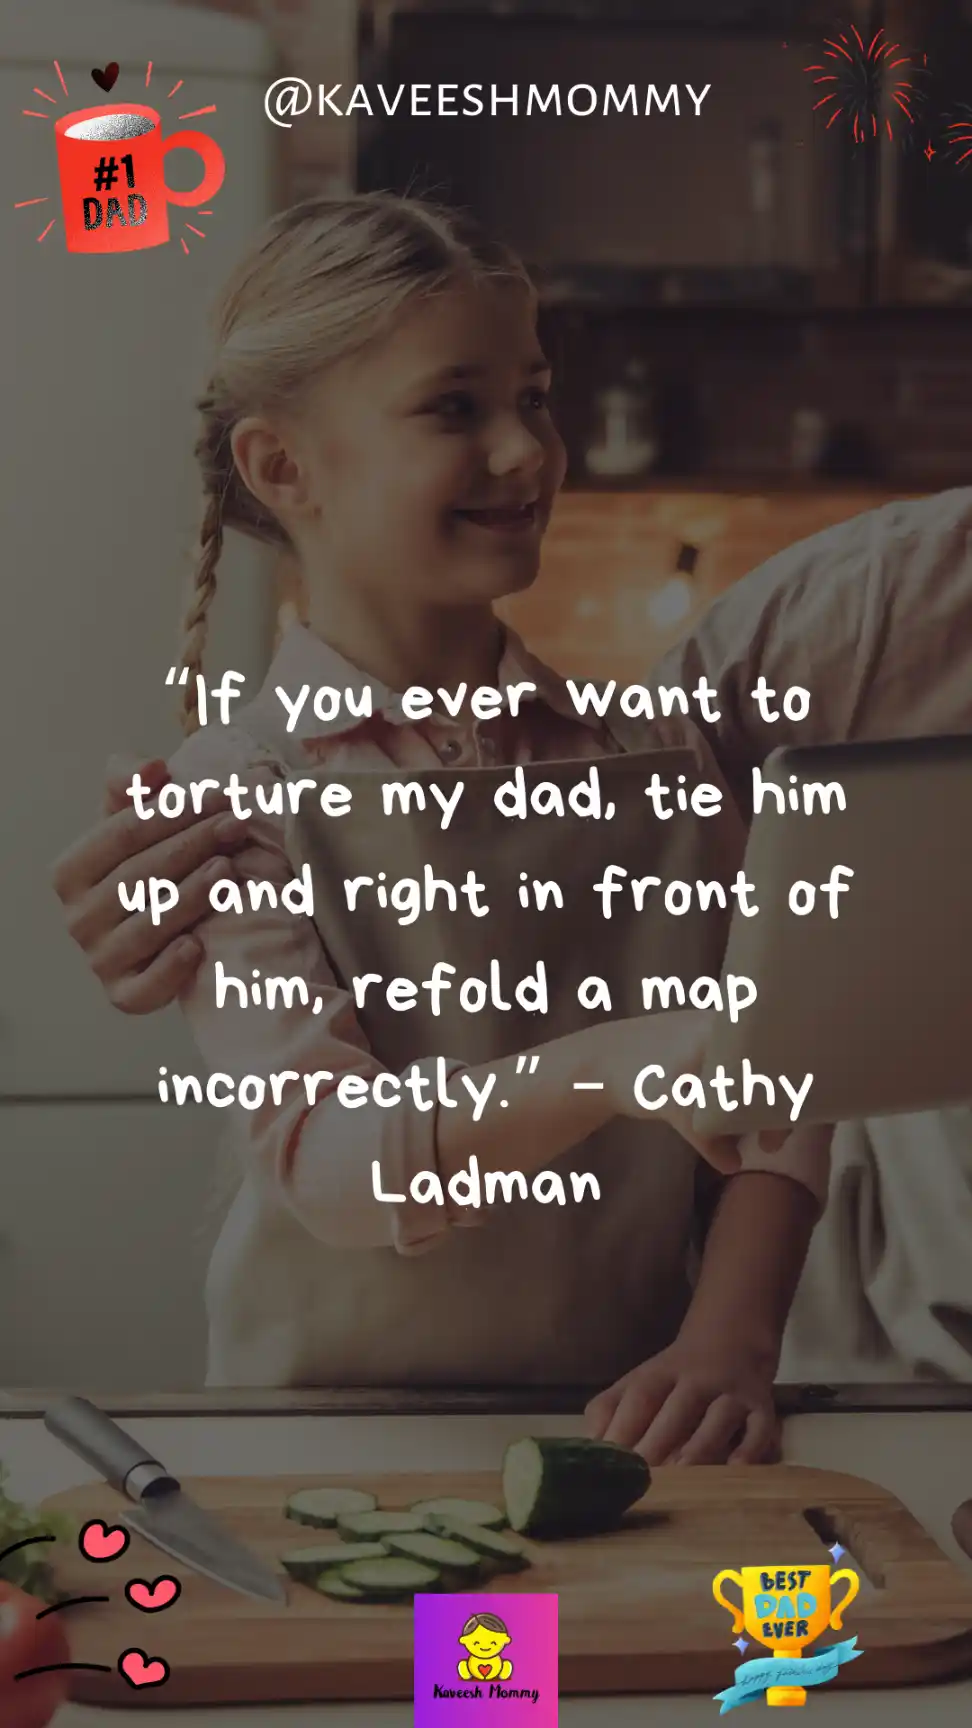 father's day note from daughter-“If you ever want to torture my dad, tie him up and right in front of him, refold a map incorrectly.” – Cathy Ladman